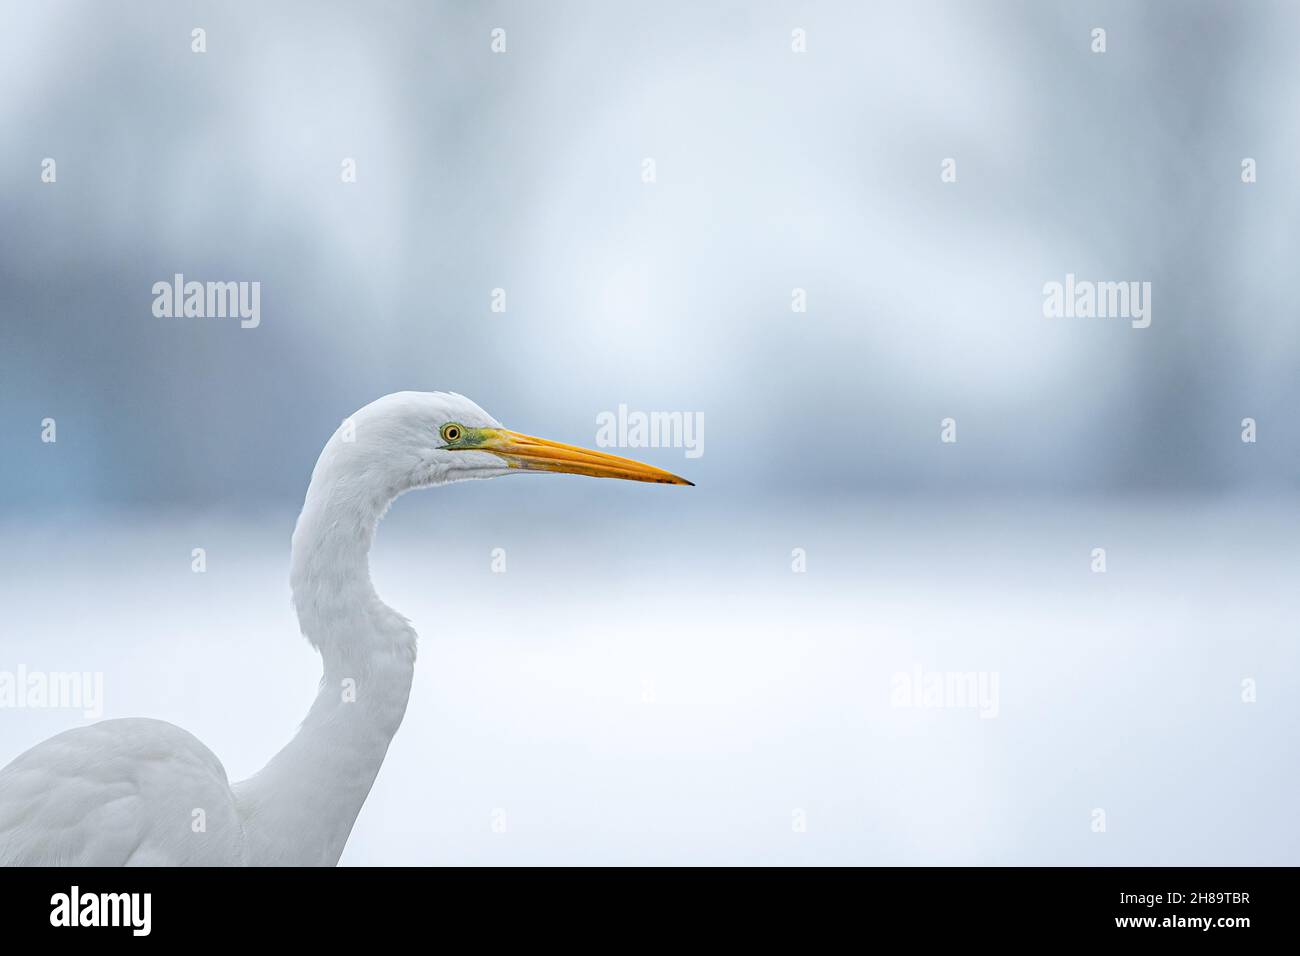 Close up photo of a great white egret Stock Photo